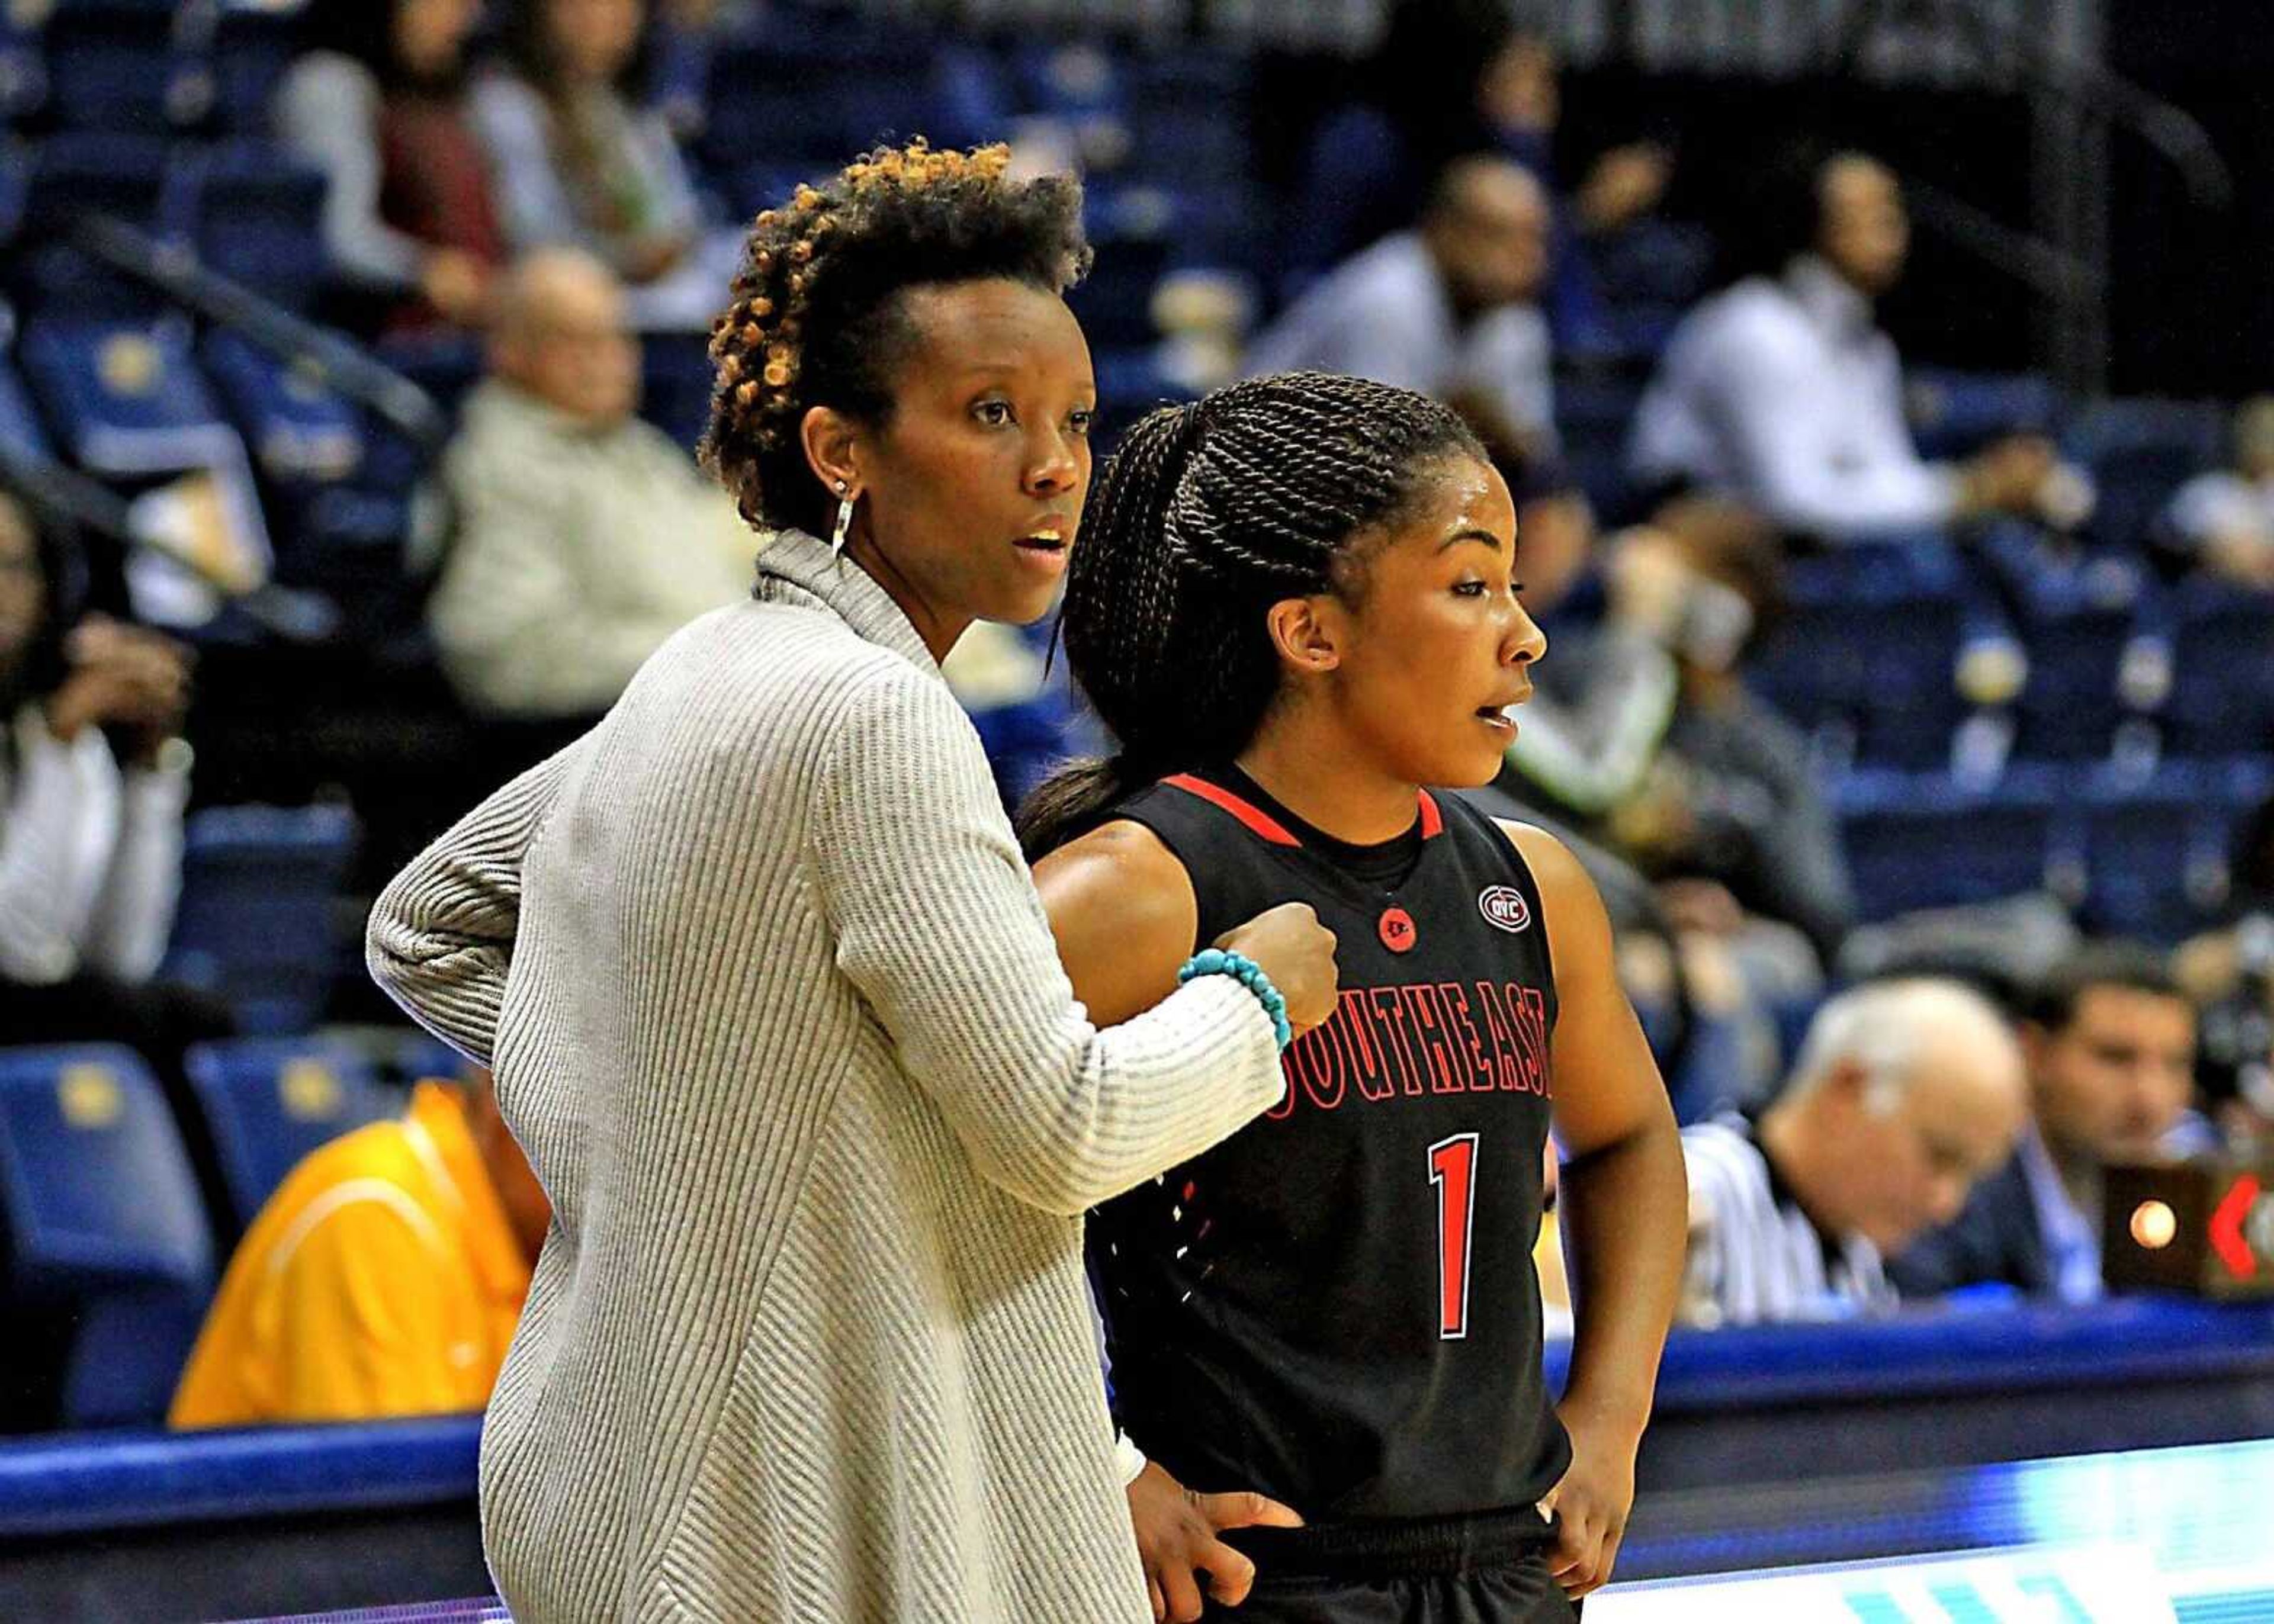 Southeast's women's basketball coach Rekha Patterson was hired in 2015 and guided the Redhawks to their first winning season in seven years. Submitted photo